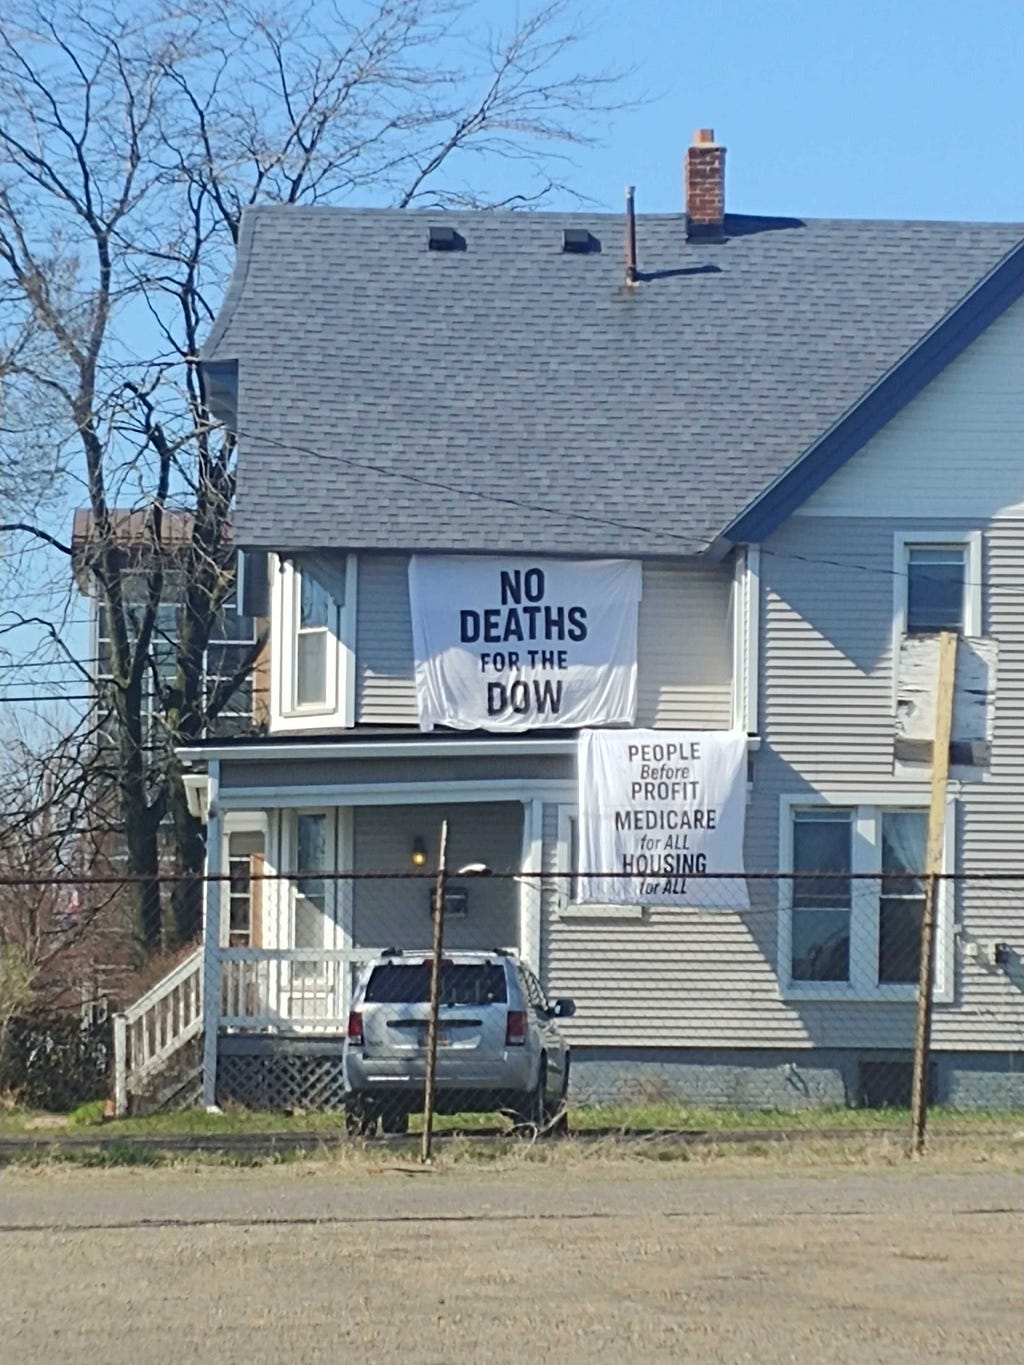 White flags on side of a house read “NO DEATHS FOR THE DOW” and “PEOPLE Before PROFIT MEDICARE for ALL HOUSING for ALL”